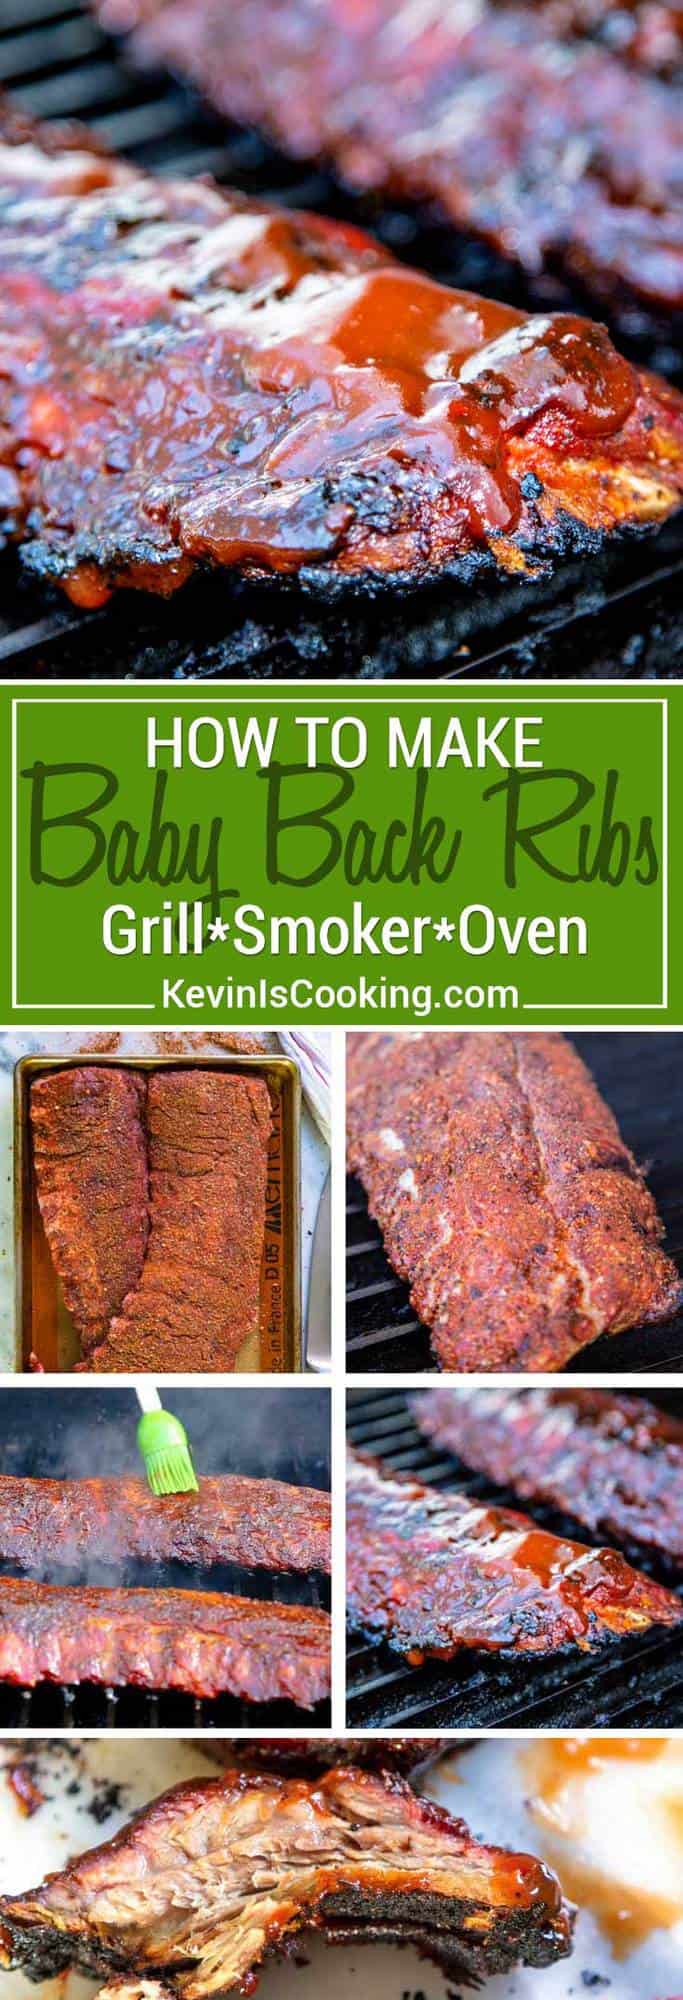 How To Make Baby Back Ribs Best Grilled Bbq Ribs Recipe Kevin Is Cooking,Lawn Aeration Advertisement